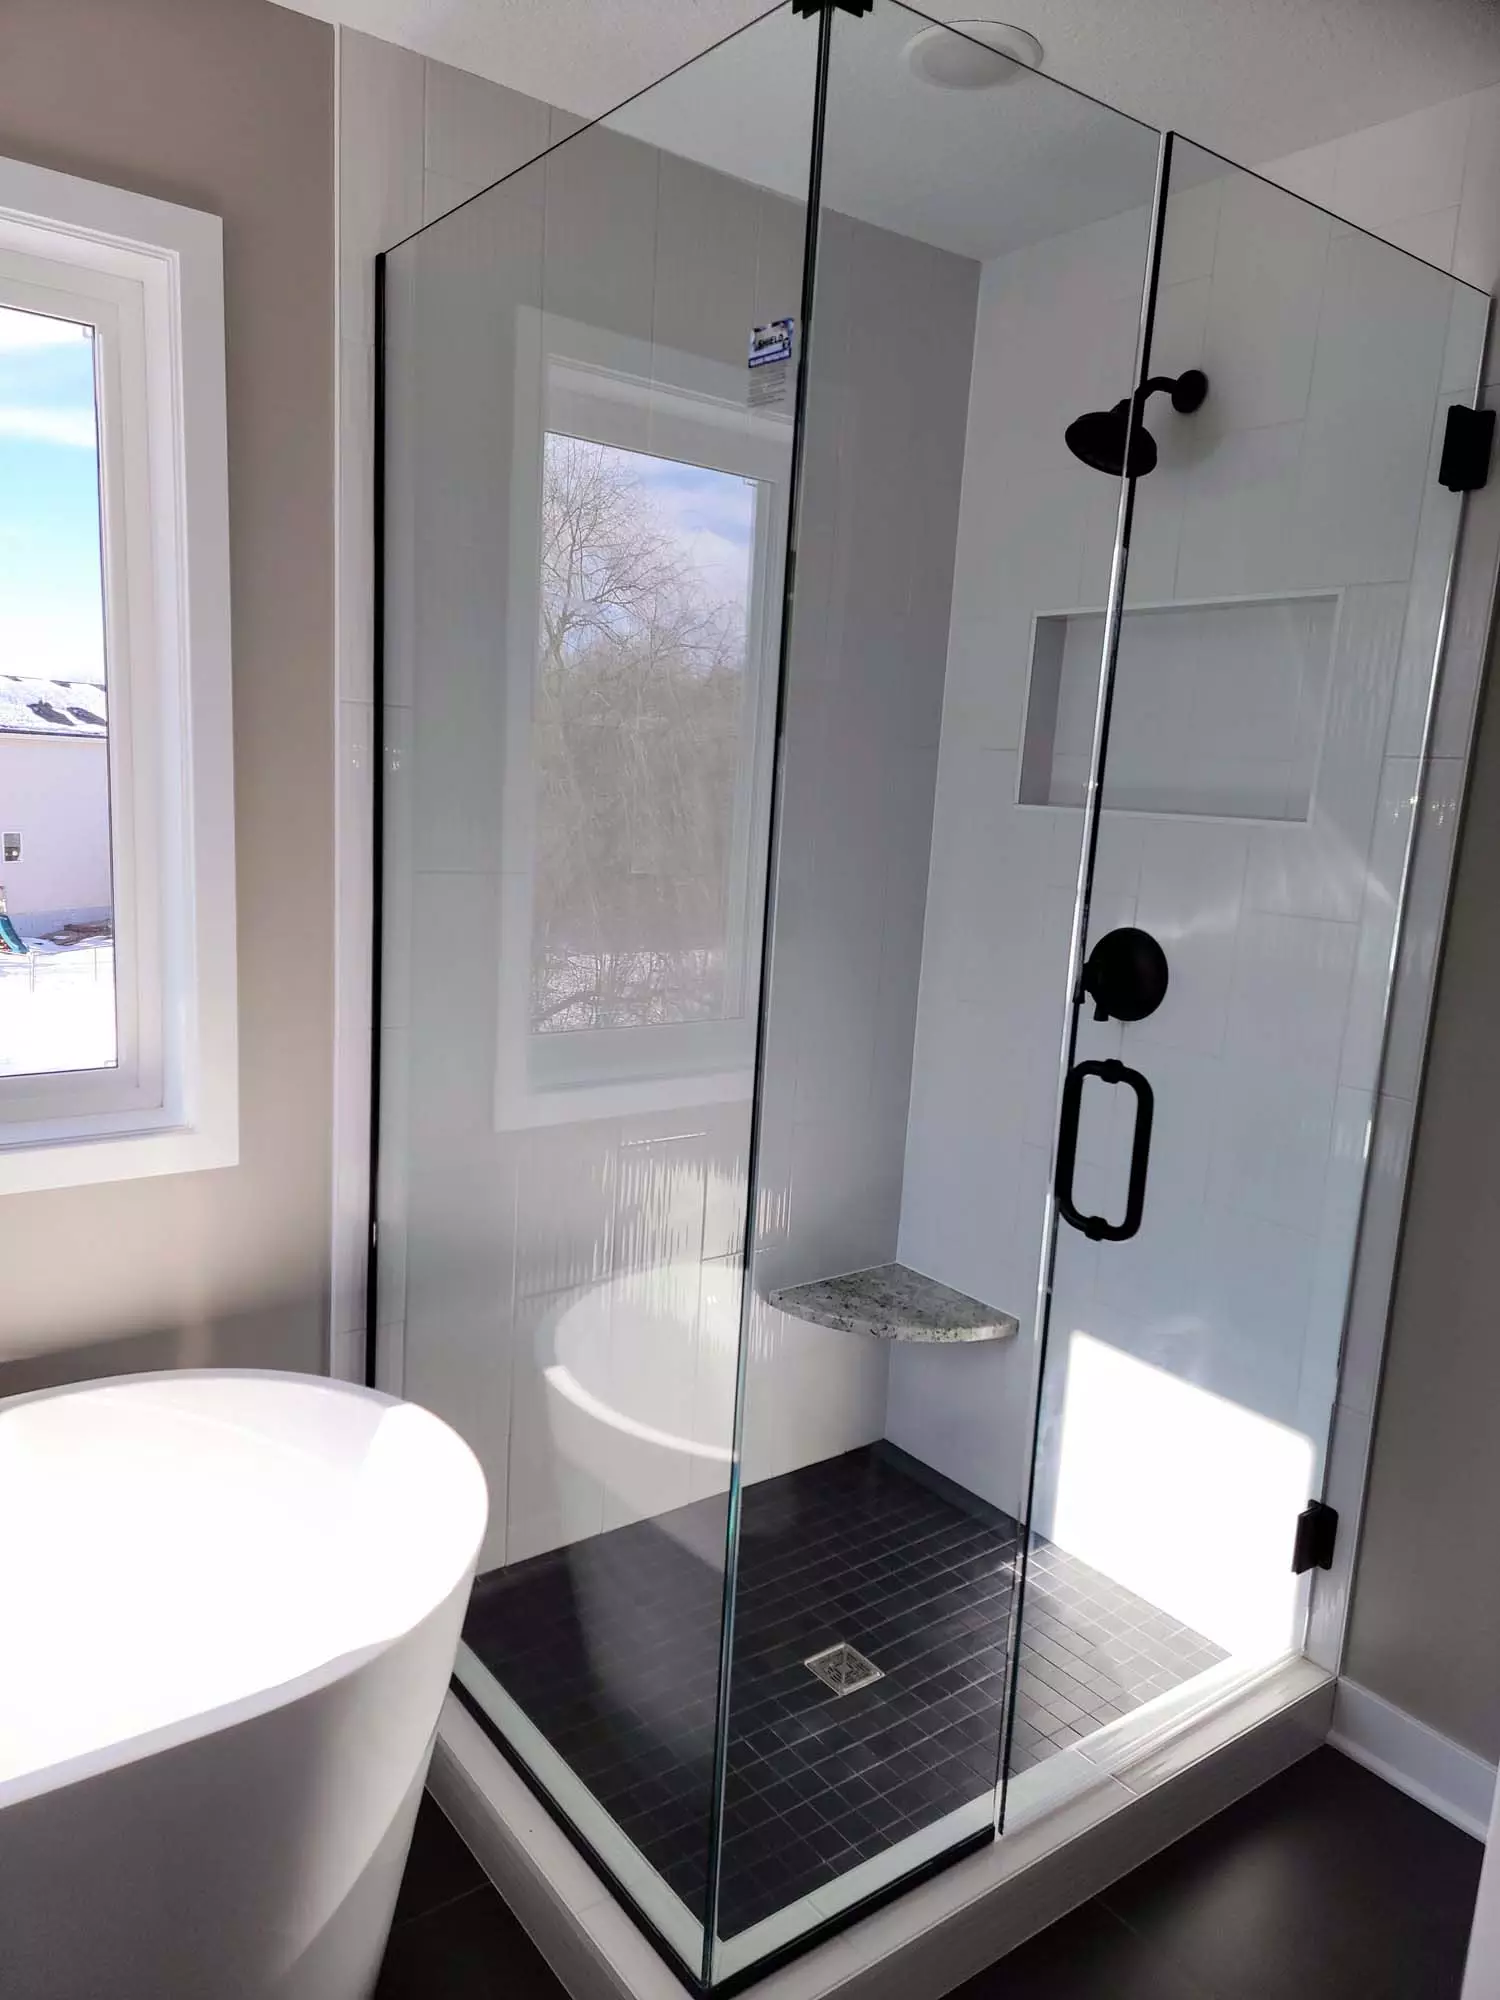 Tiled Showers, Frameless heavy glass enclosures, Niches